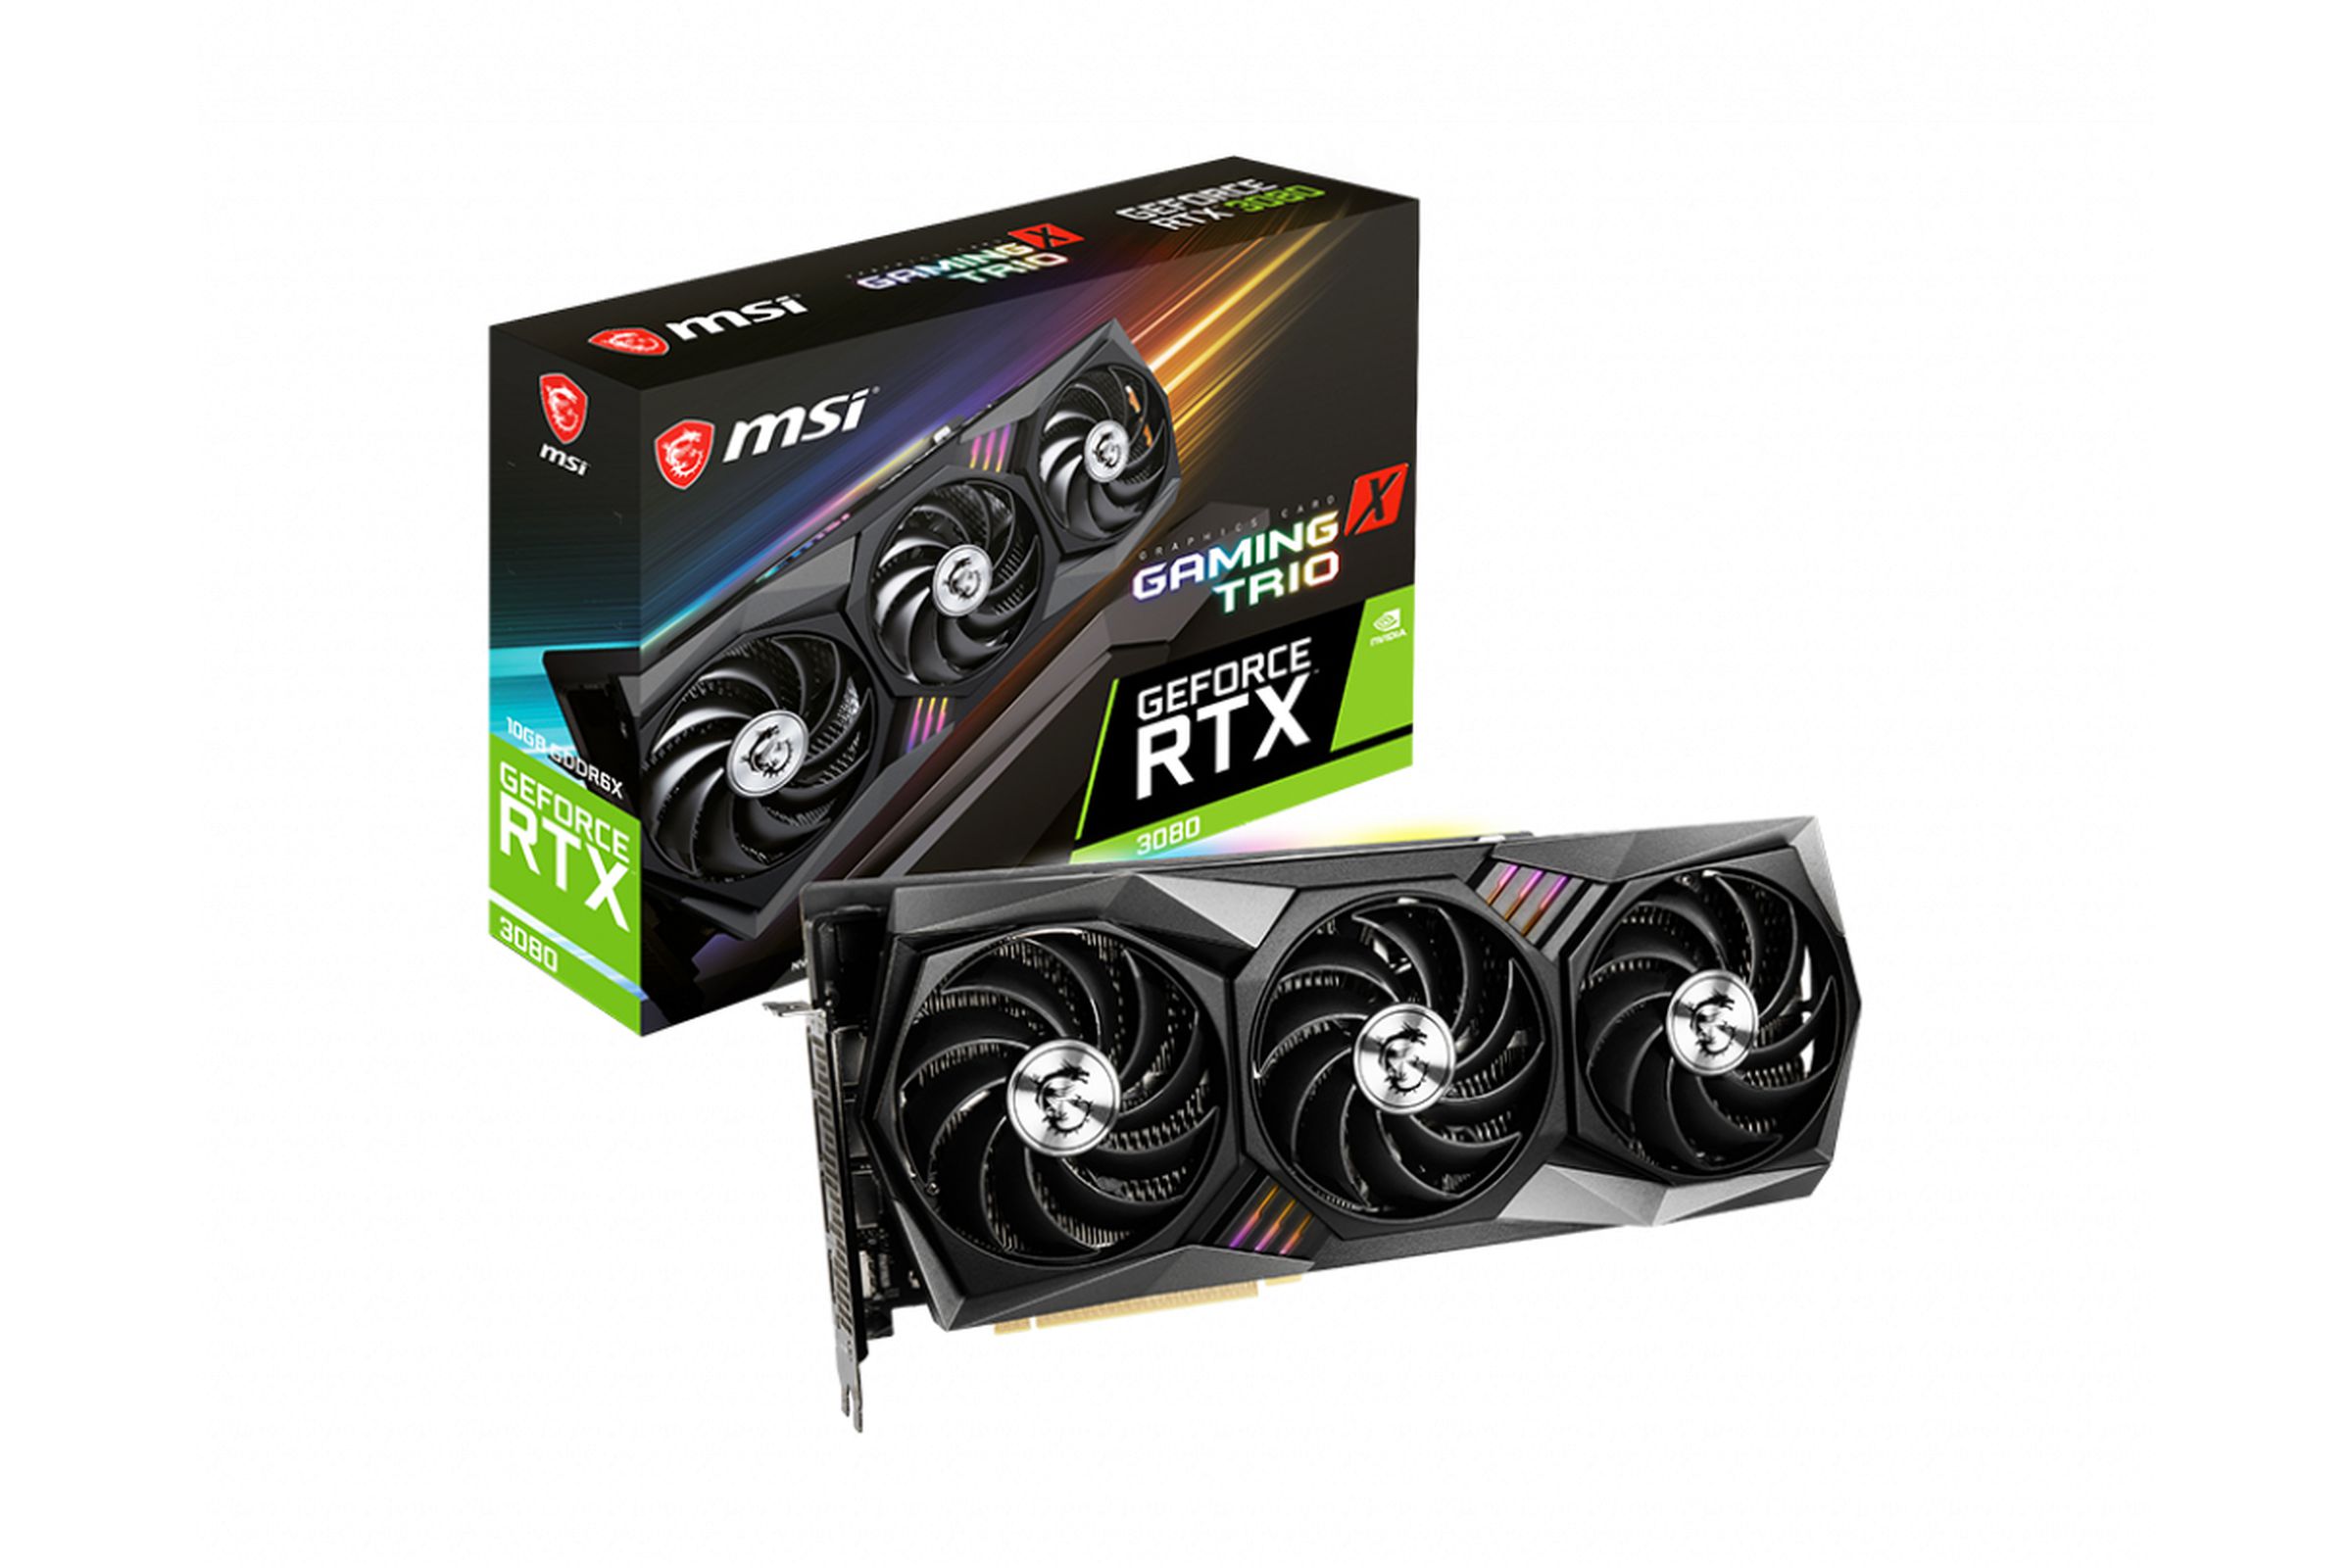 Starlit Partner was selling an MSI RTX 3080 for hundreds of dollars over its MSRP on eBay.